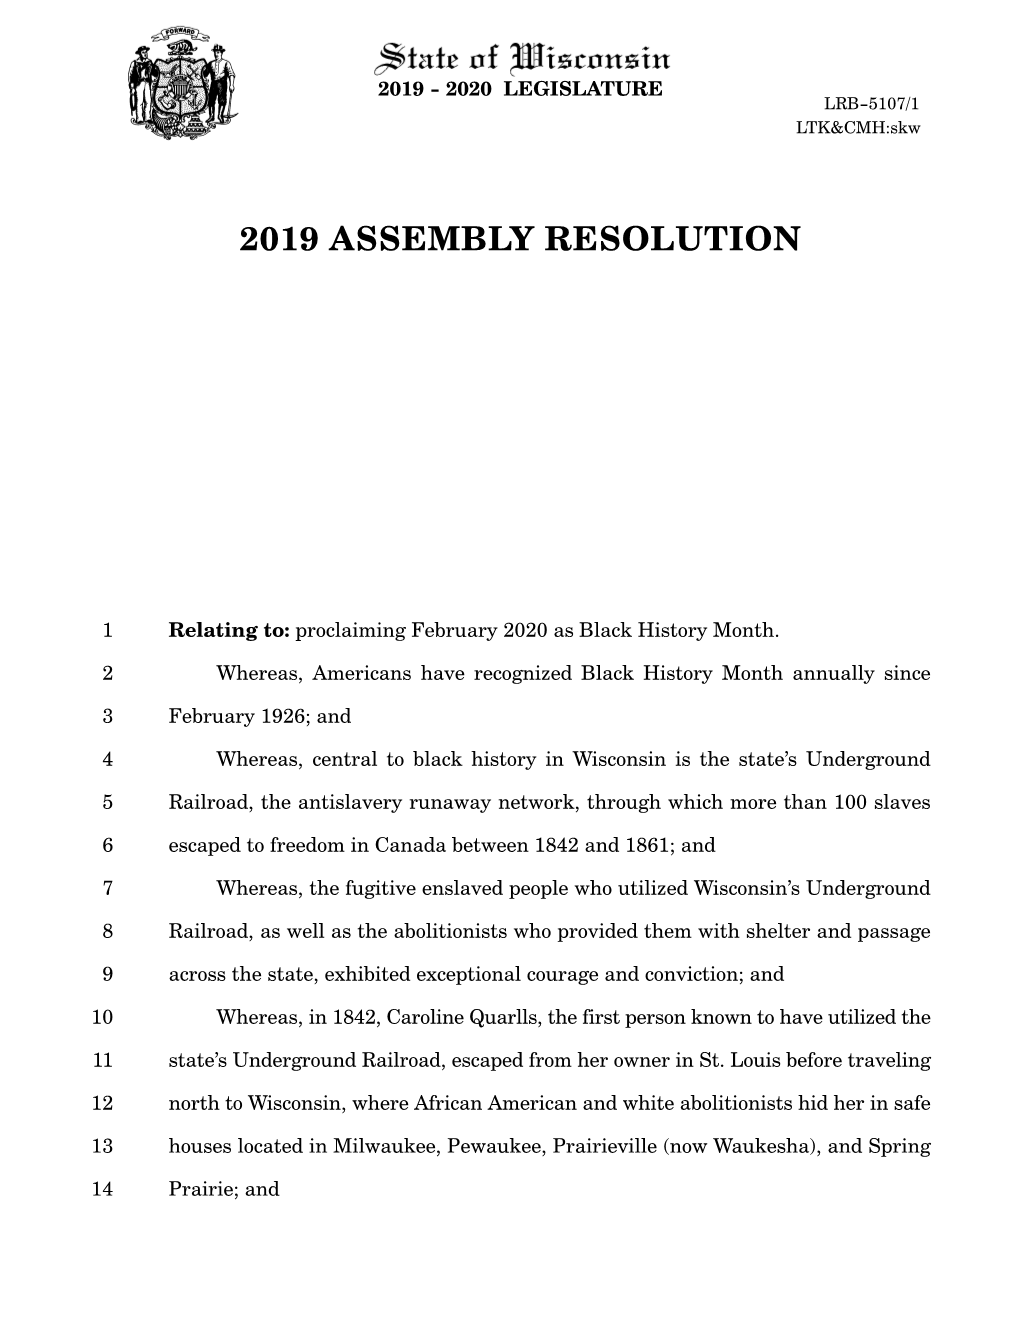 2019 Assembly Resolution